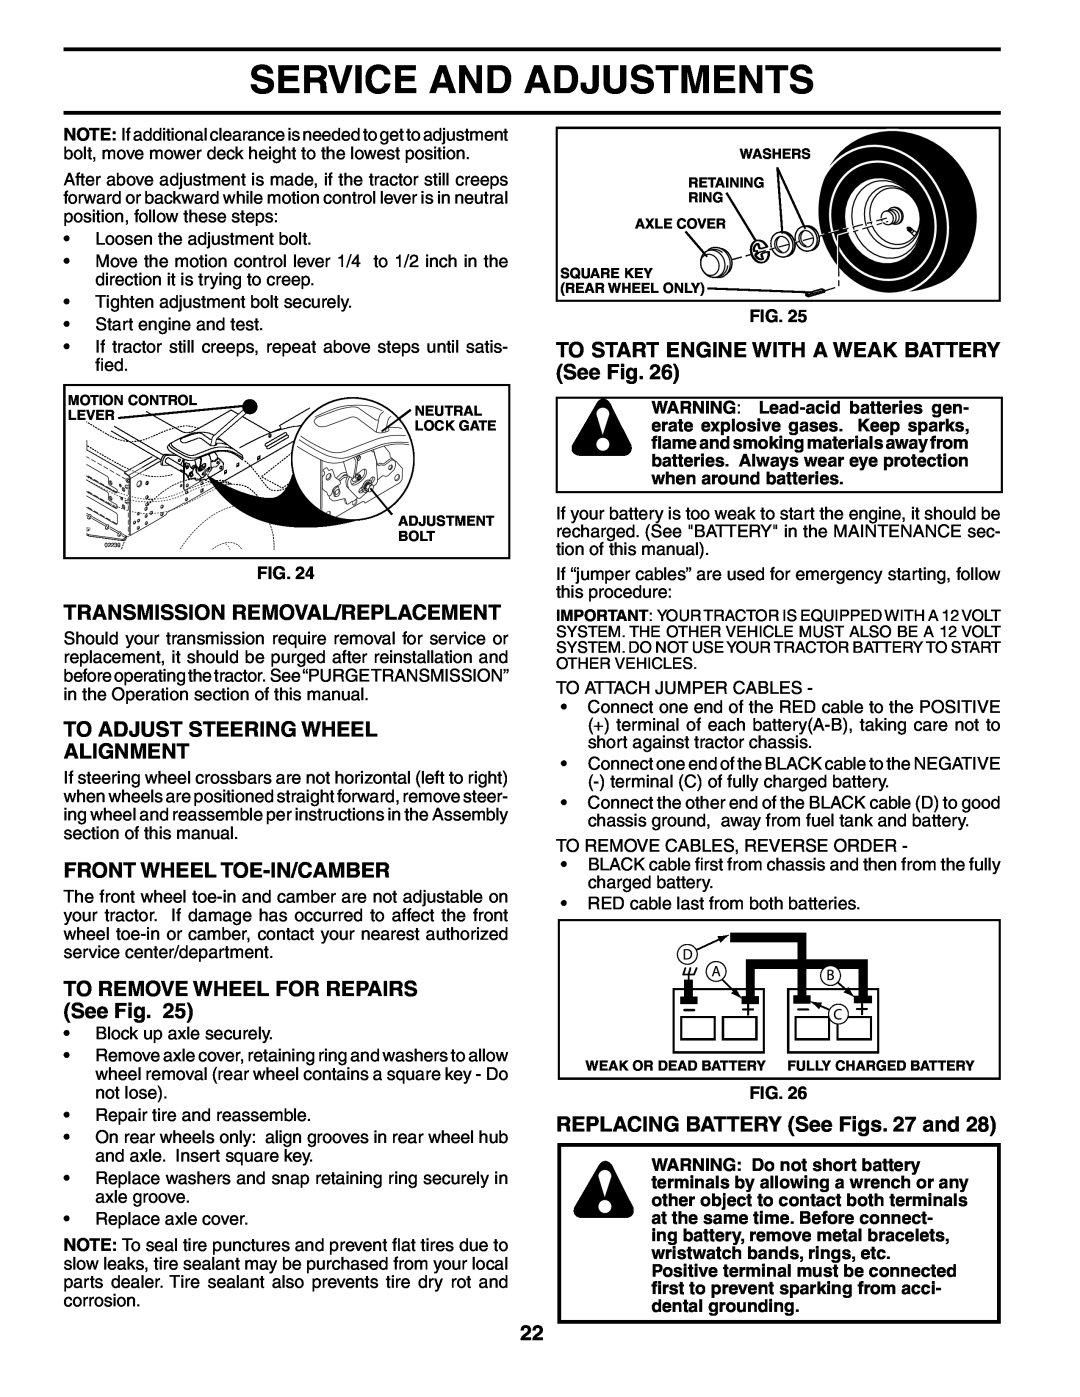 Poulan 187301 manual Transmission Removal/Replacement, To Adjust Steering Wheel Alignment, Front Wheel Toe-In/Camber 